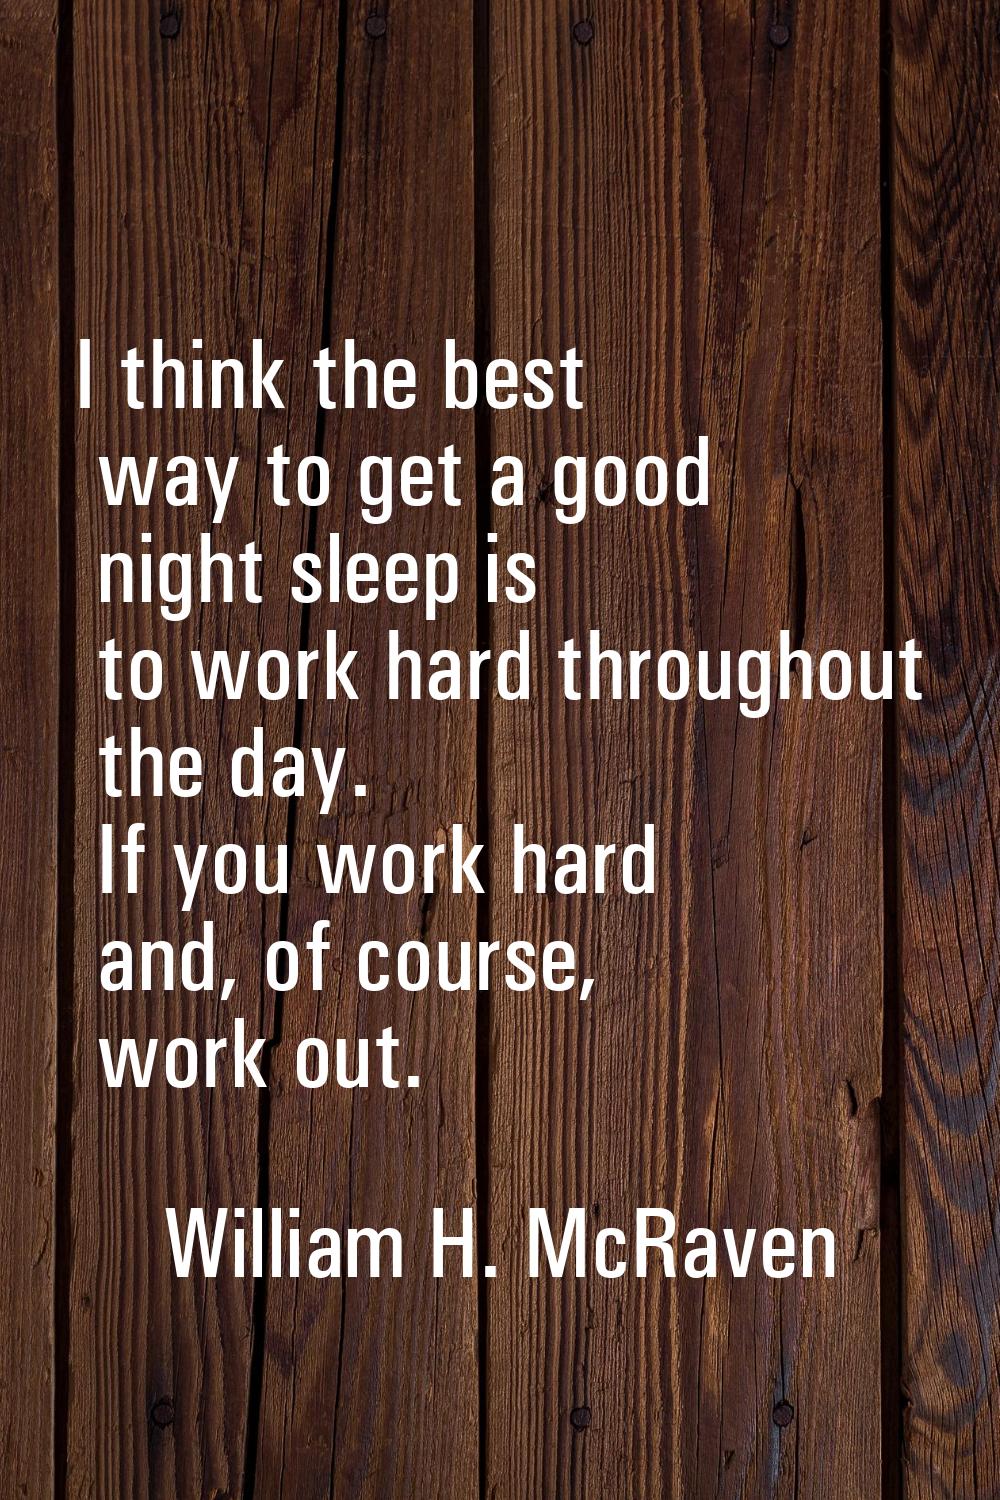 I think the best way to get a good night sleep is to work hard throughout the day. If you work hard